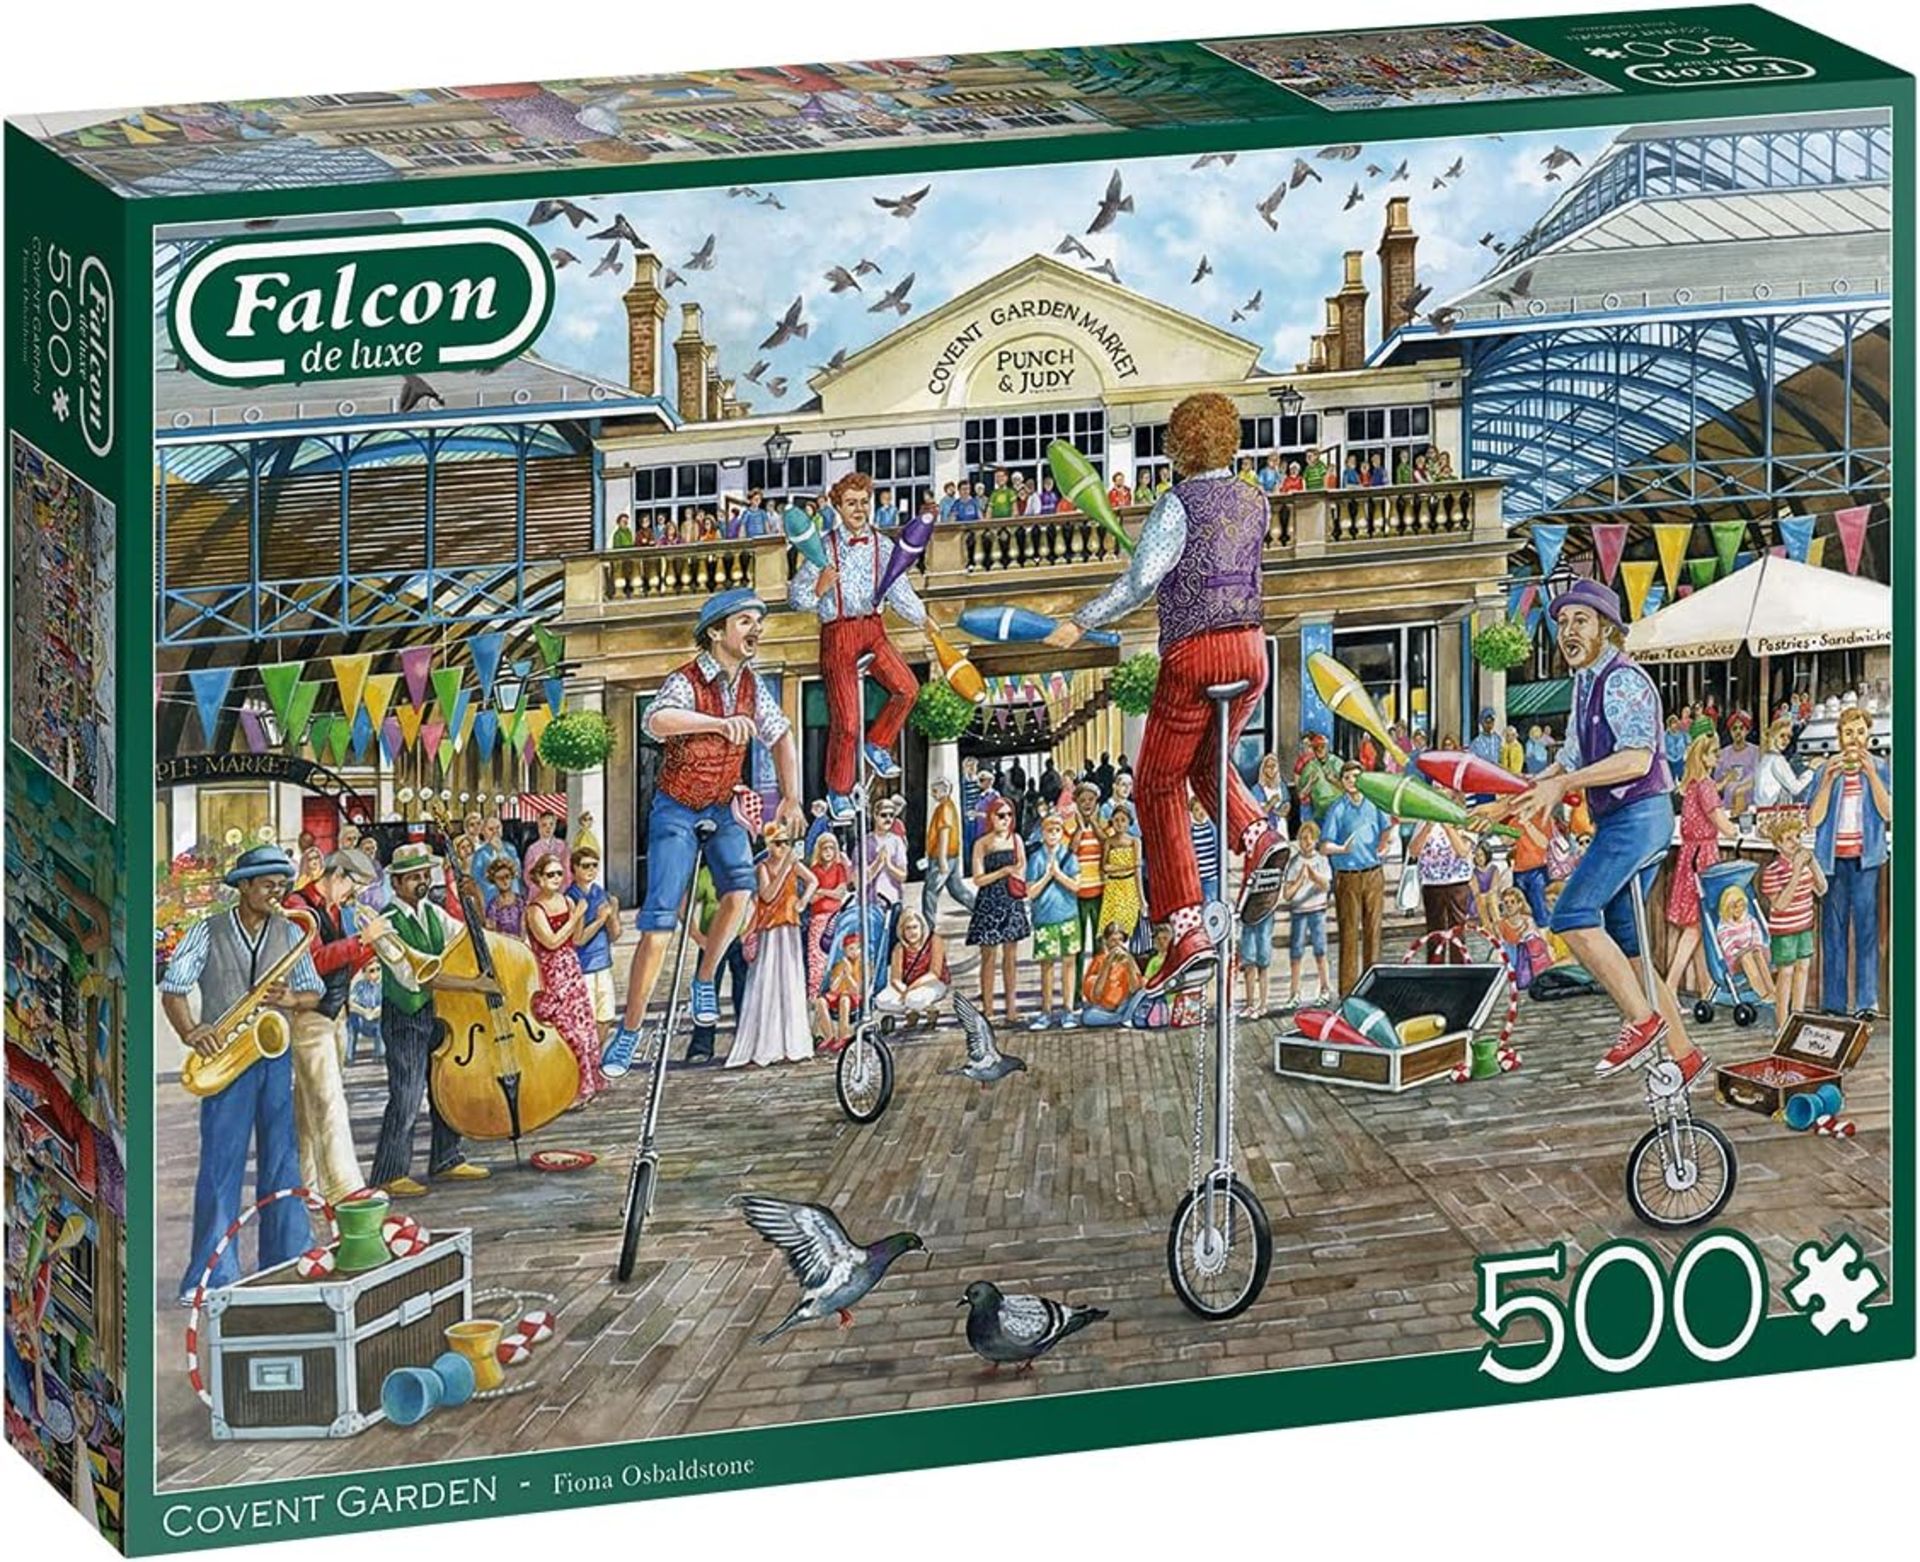 50 X NEW COVENT GARDEN 500PC JIGSAW - Image 5 of 5